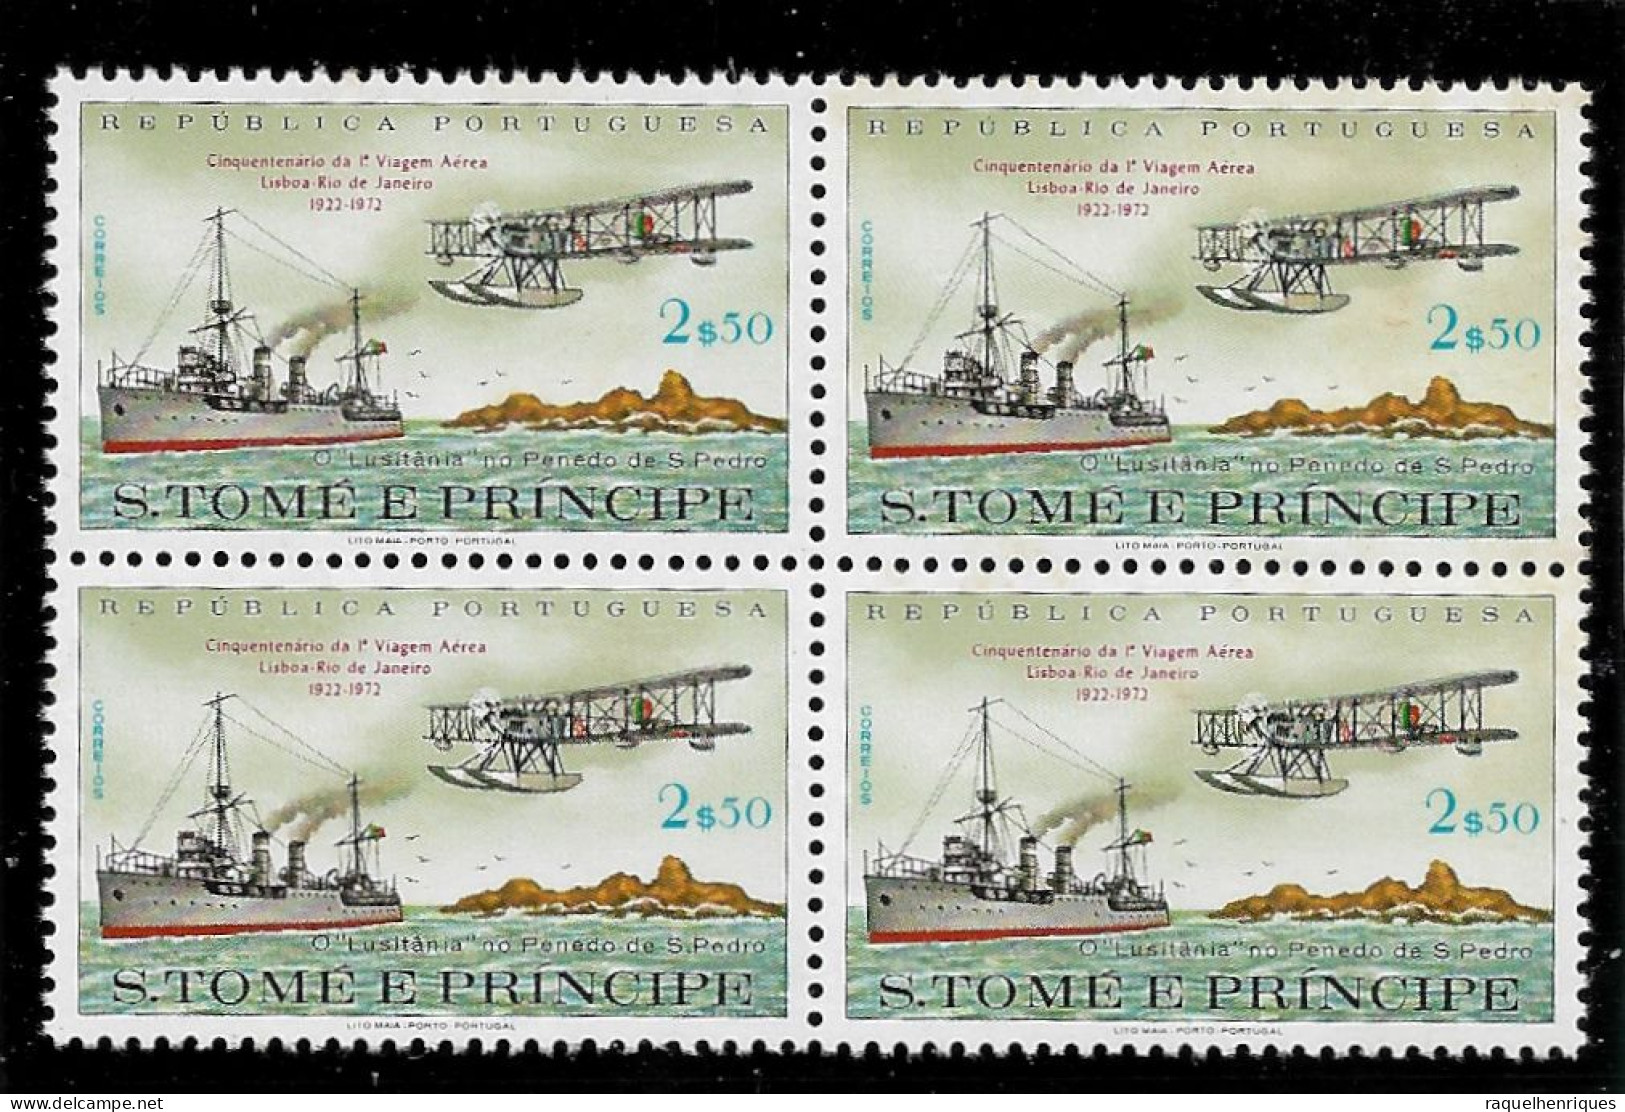 ST. TOME AND PRINCE STAMP - 1972 The 50th Anniversary Of 1st Flight, Lisbon-Rio De Janeiro BLOCK OF 4 MNH (NP#67-P40) - St. Thomas & Prince